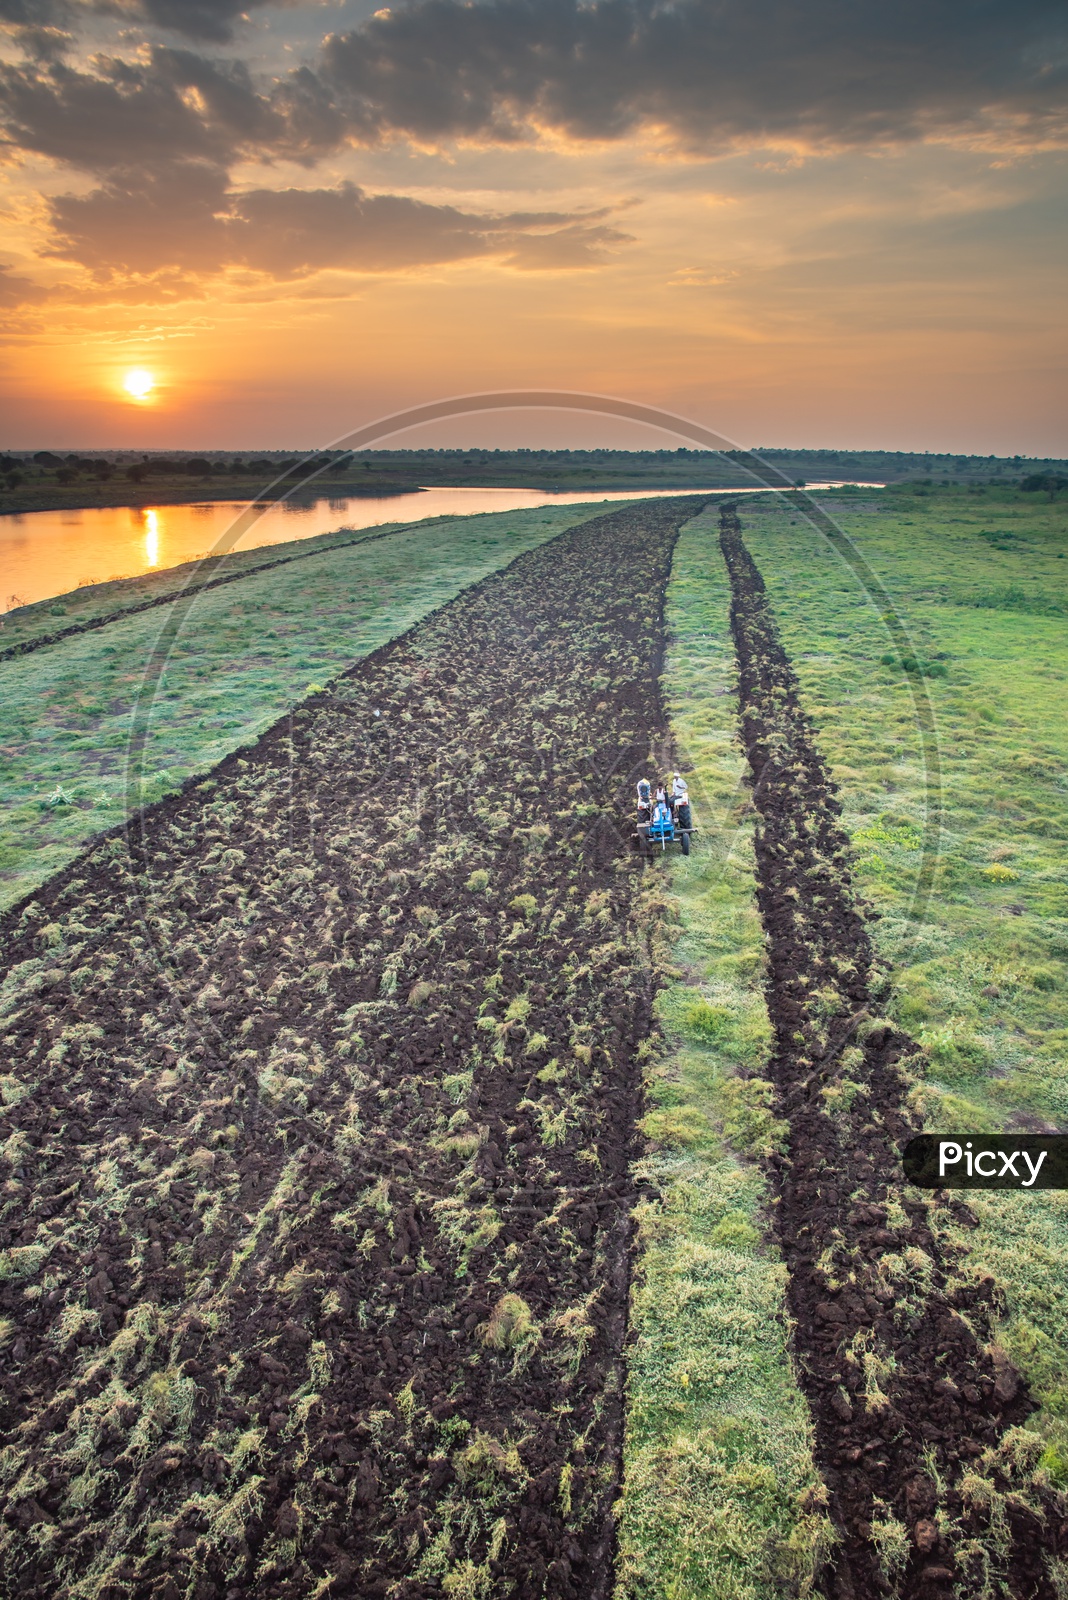 Cultivation on the banks of River Manjeera at sunset